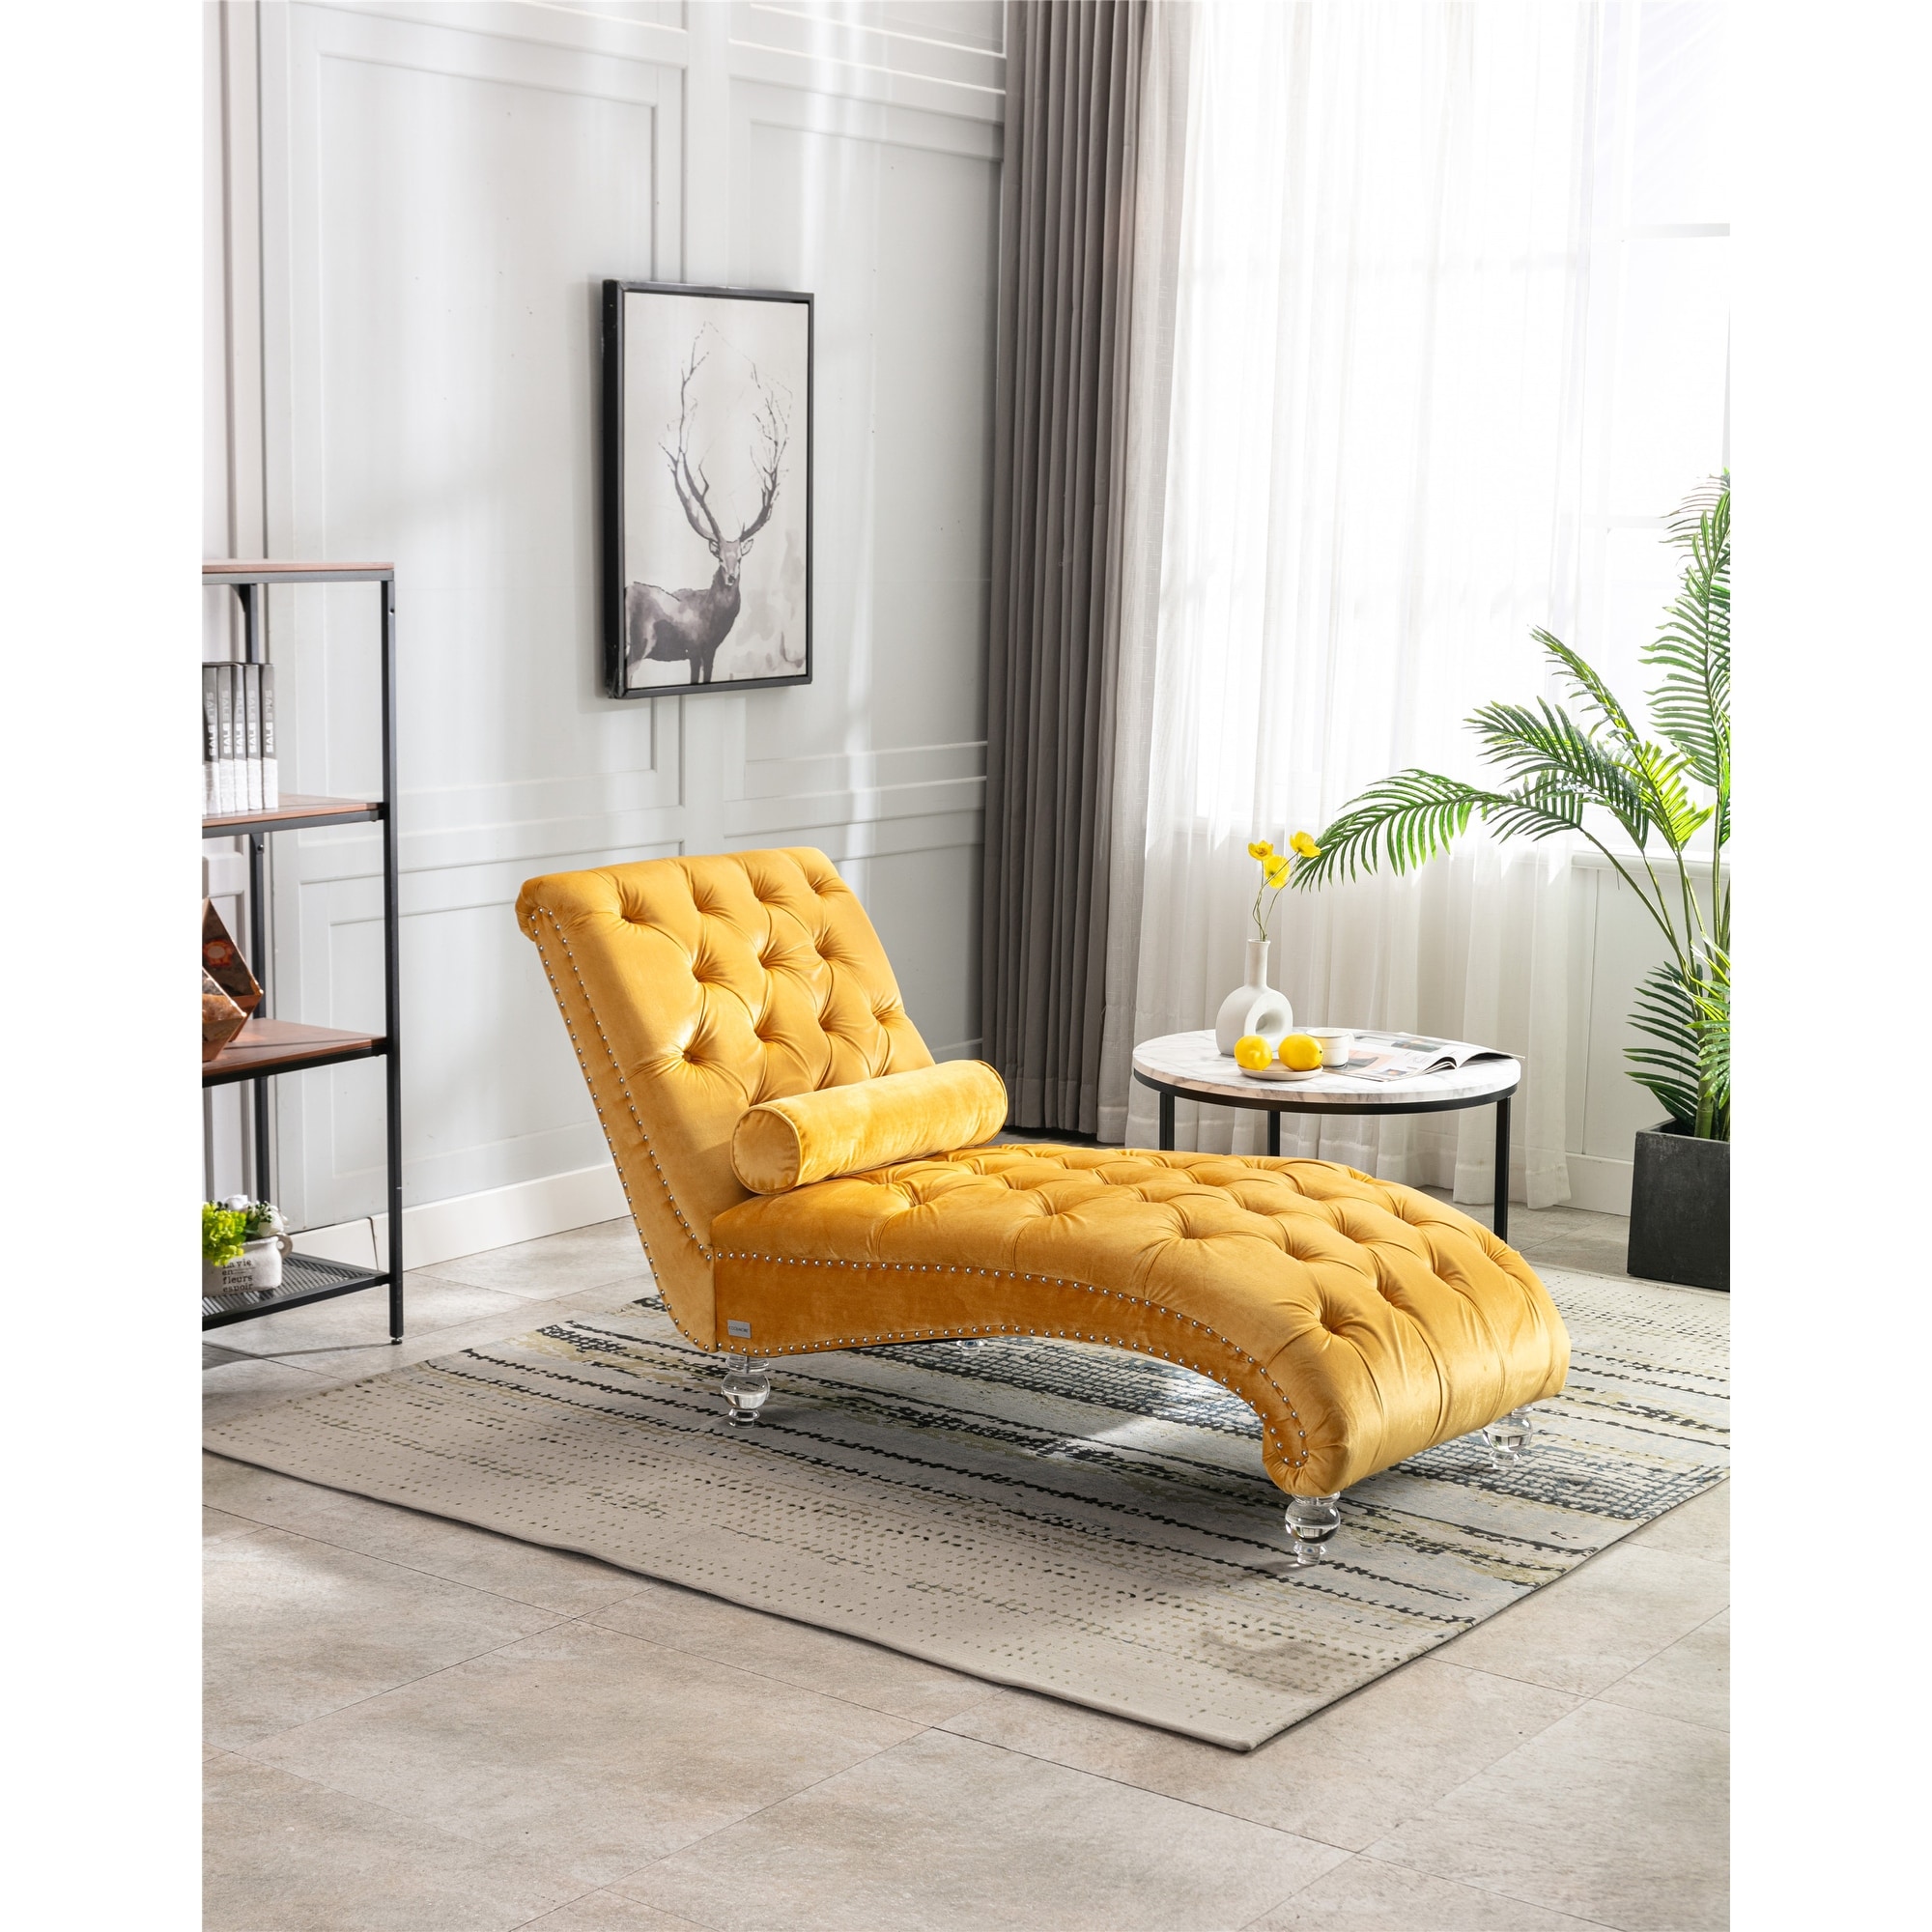 Aoolive Retro Luxury Chaise Lounge Sofa with Transparent Acrylic Feet